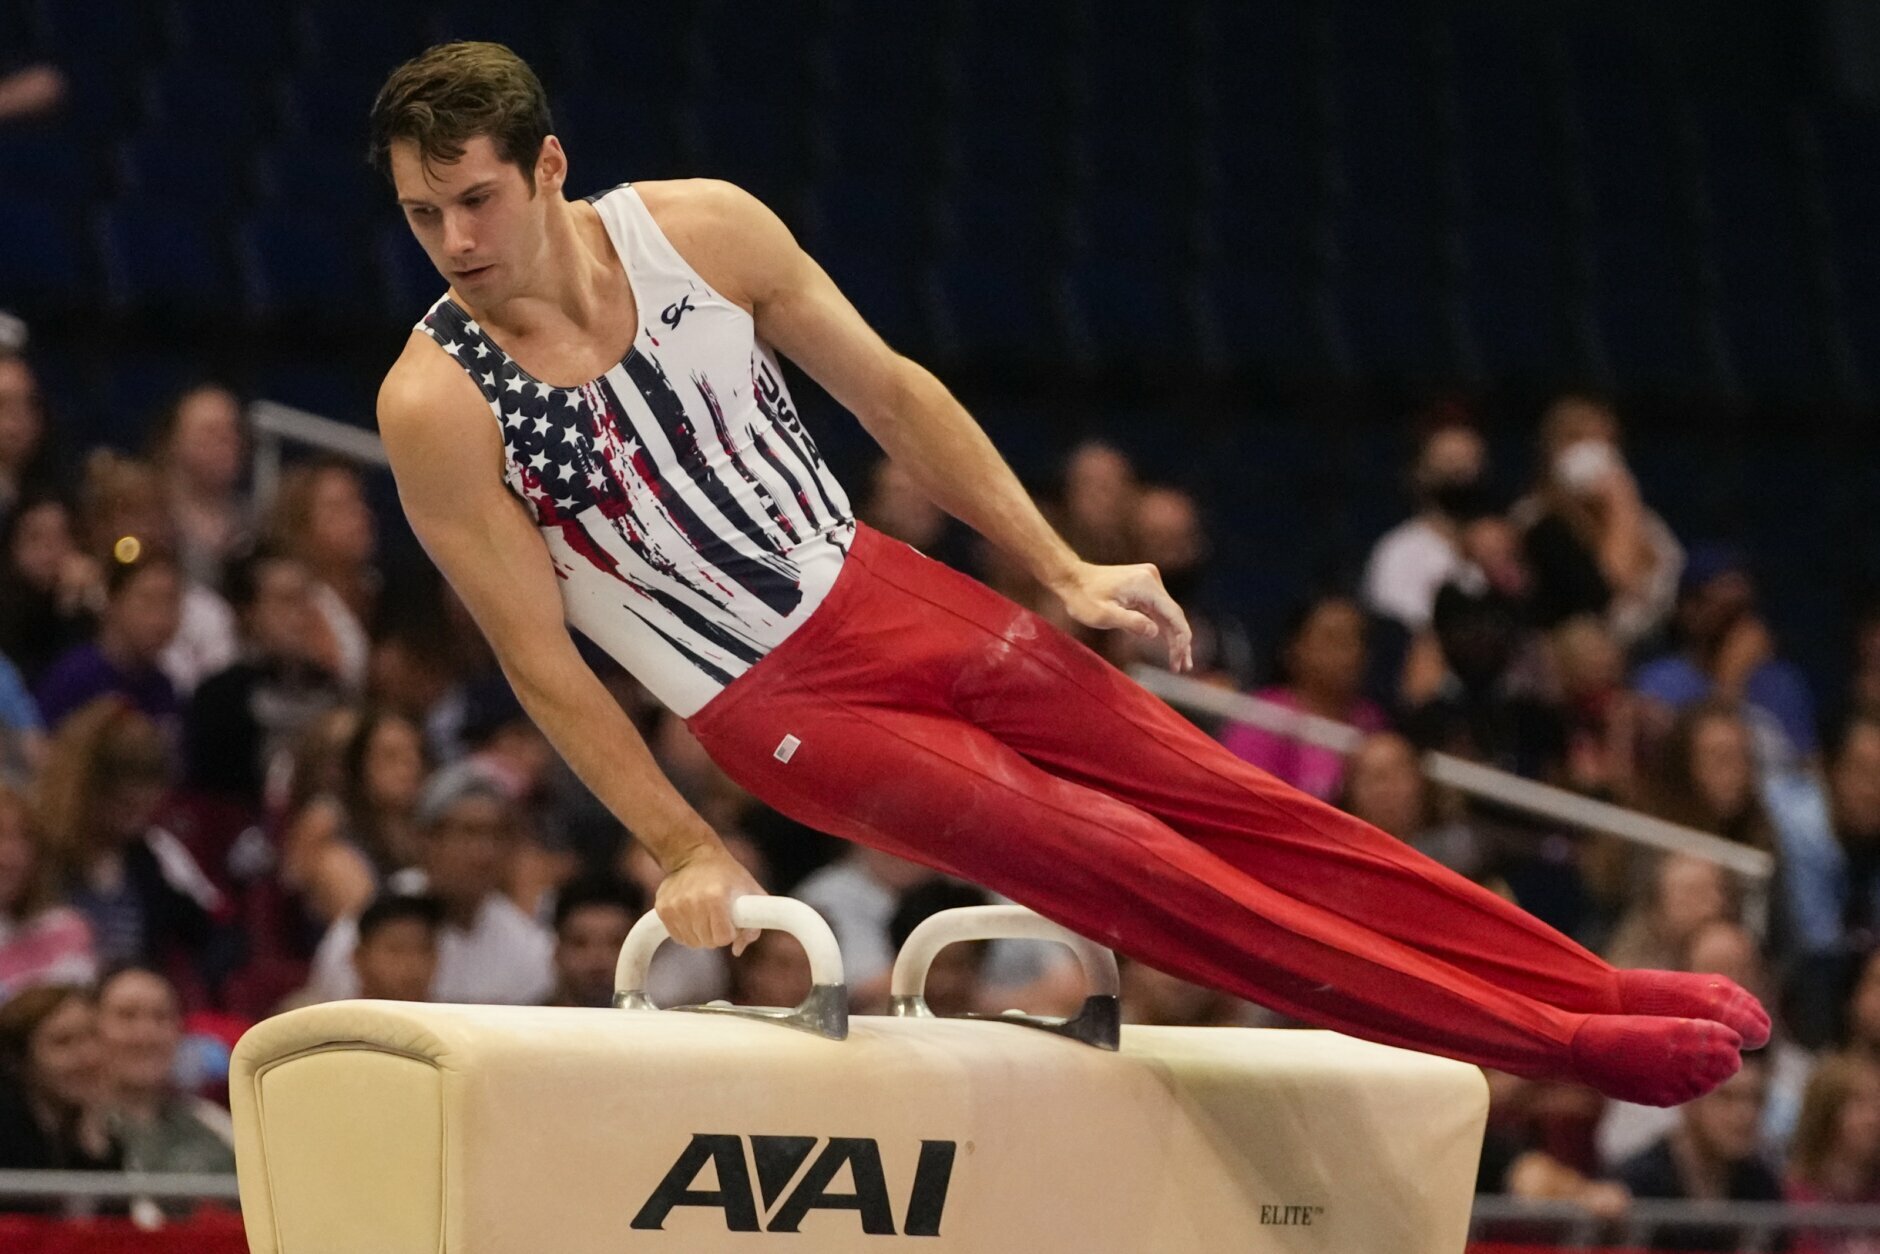 <p>Alec Yoder competes on the pommel horse during the men&#8217;s U.S. Olympic Gymnastics Trials Saturday, June 26, 2021, in St. Louis.</p>
